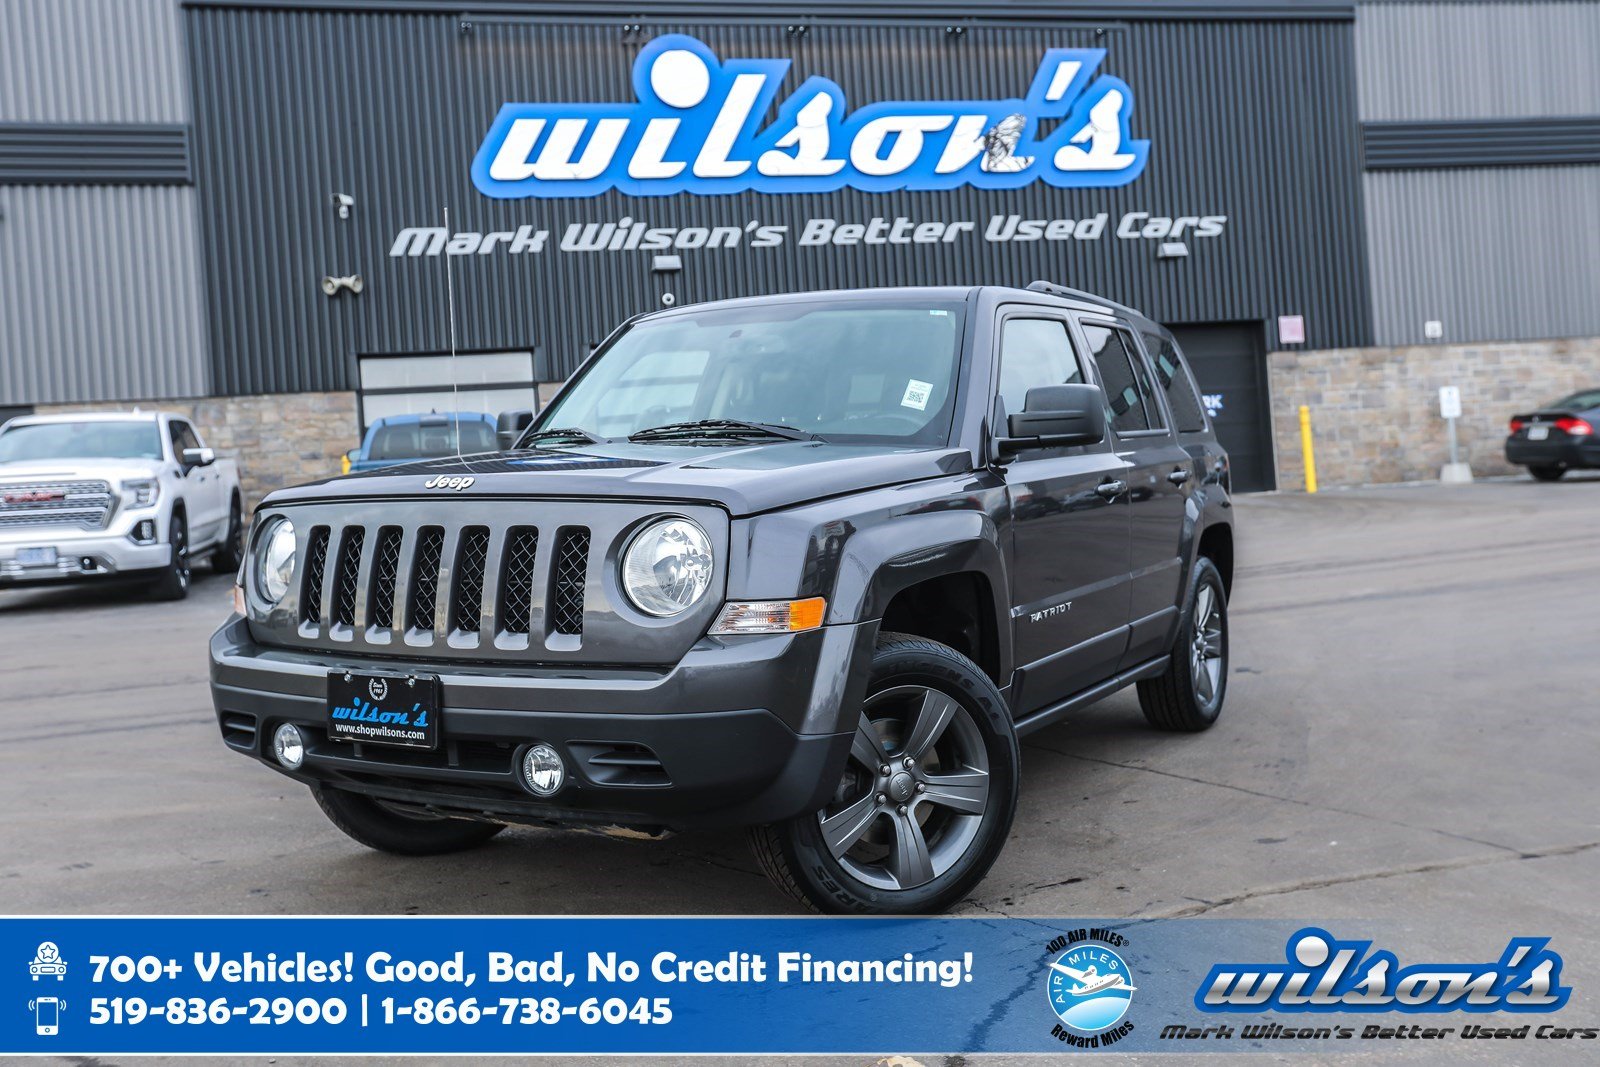 Certified Pre Owned 2015 Jeep Patriot High Altitude 4x4 Leather Navigation Sunroof Heated Seats New Tires Bluetooth More